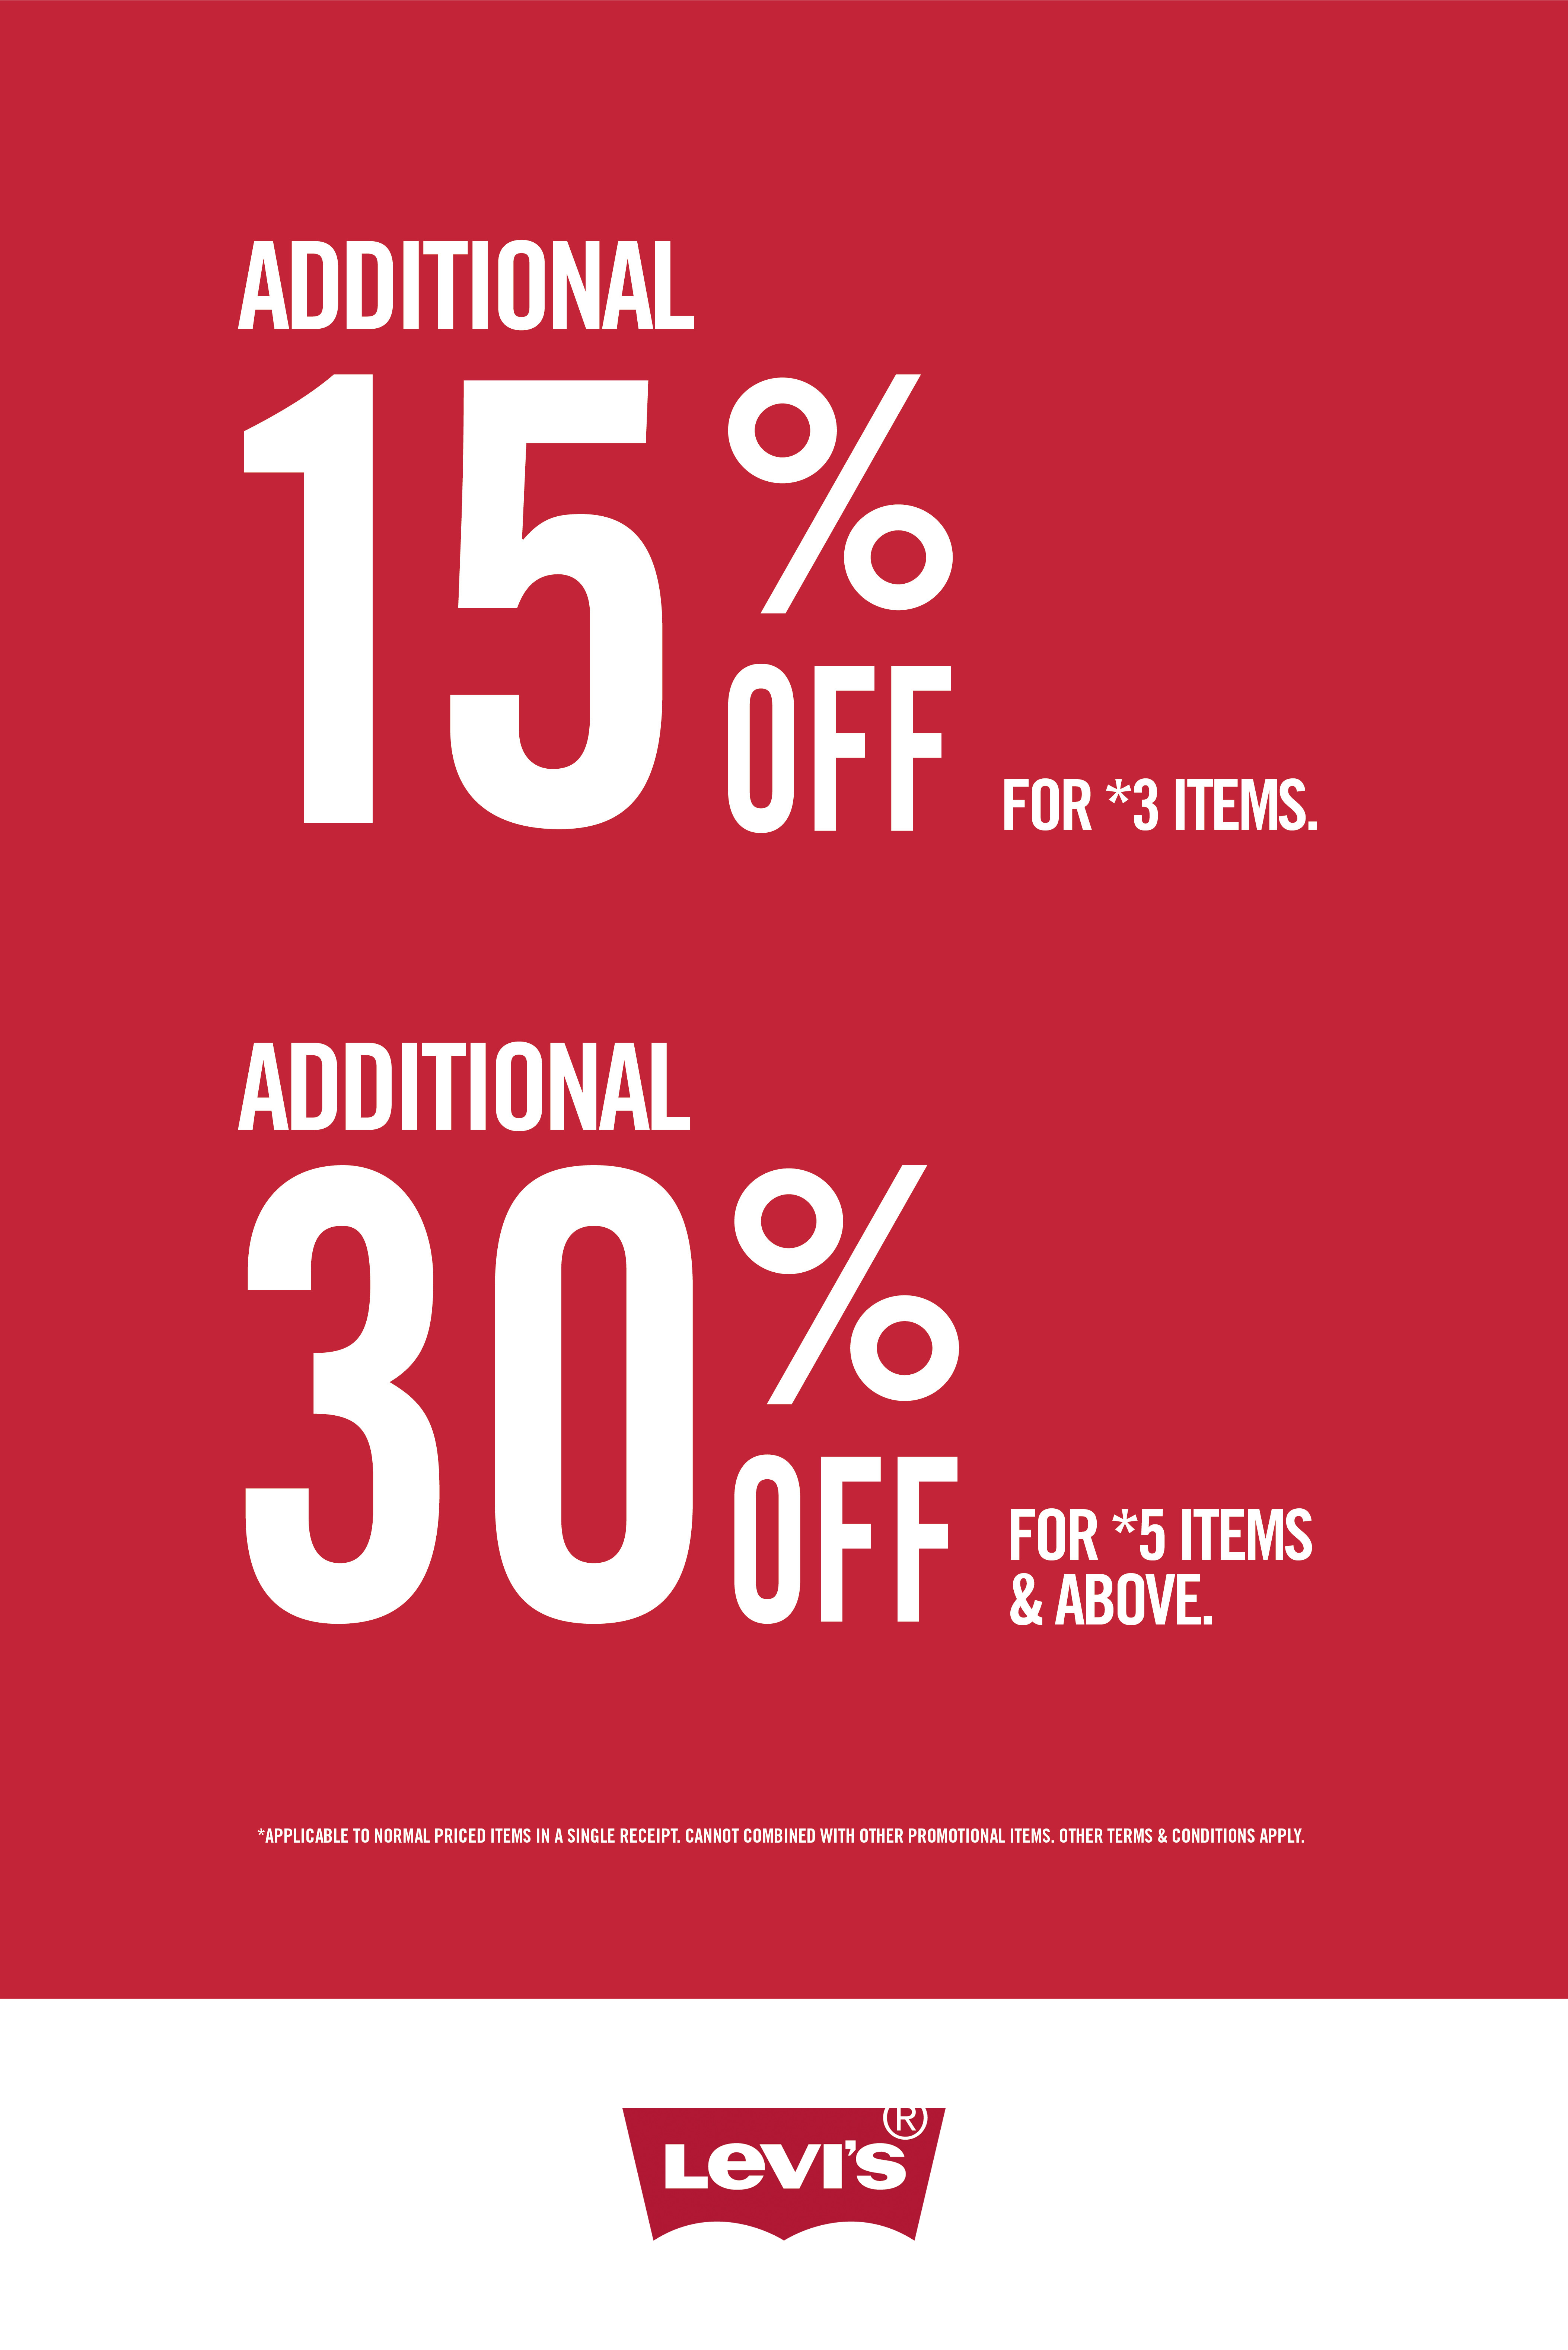 Design Village | Levi’s Additional 15% and 30% Discount 1-31 March 2017